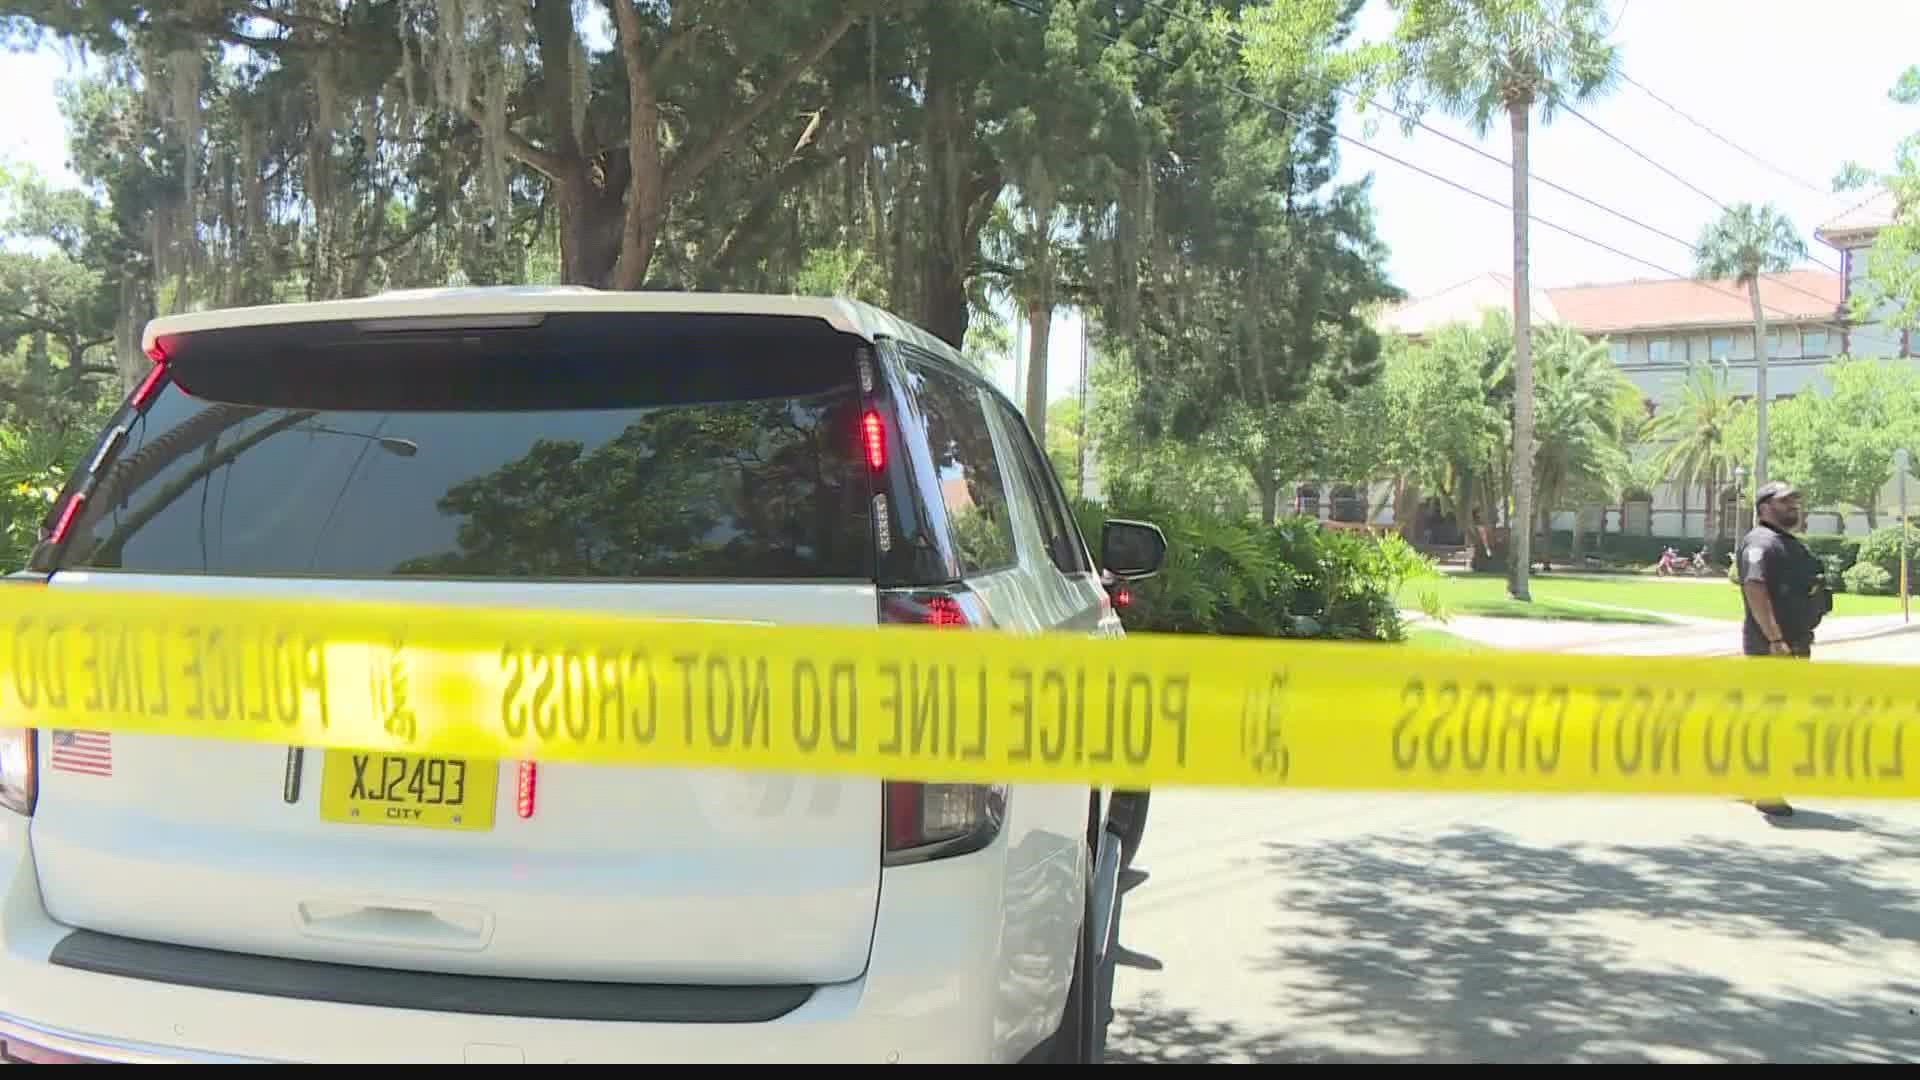 A chunk of downtown St. Augustine was roped off with yellow police tape Thursday.